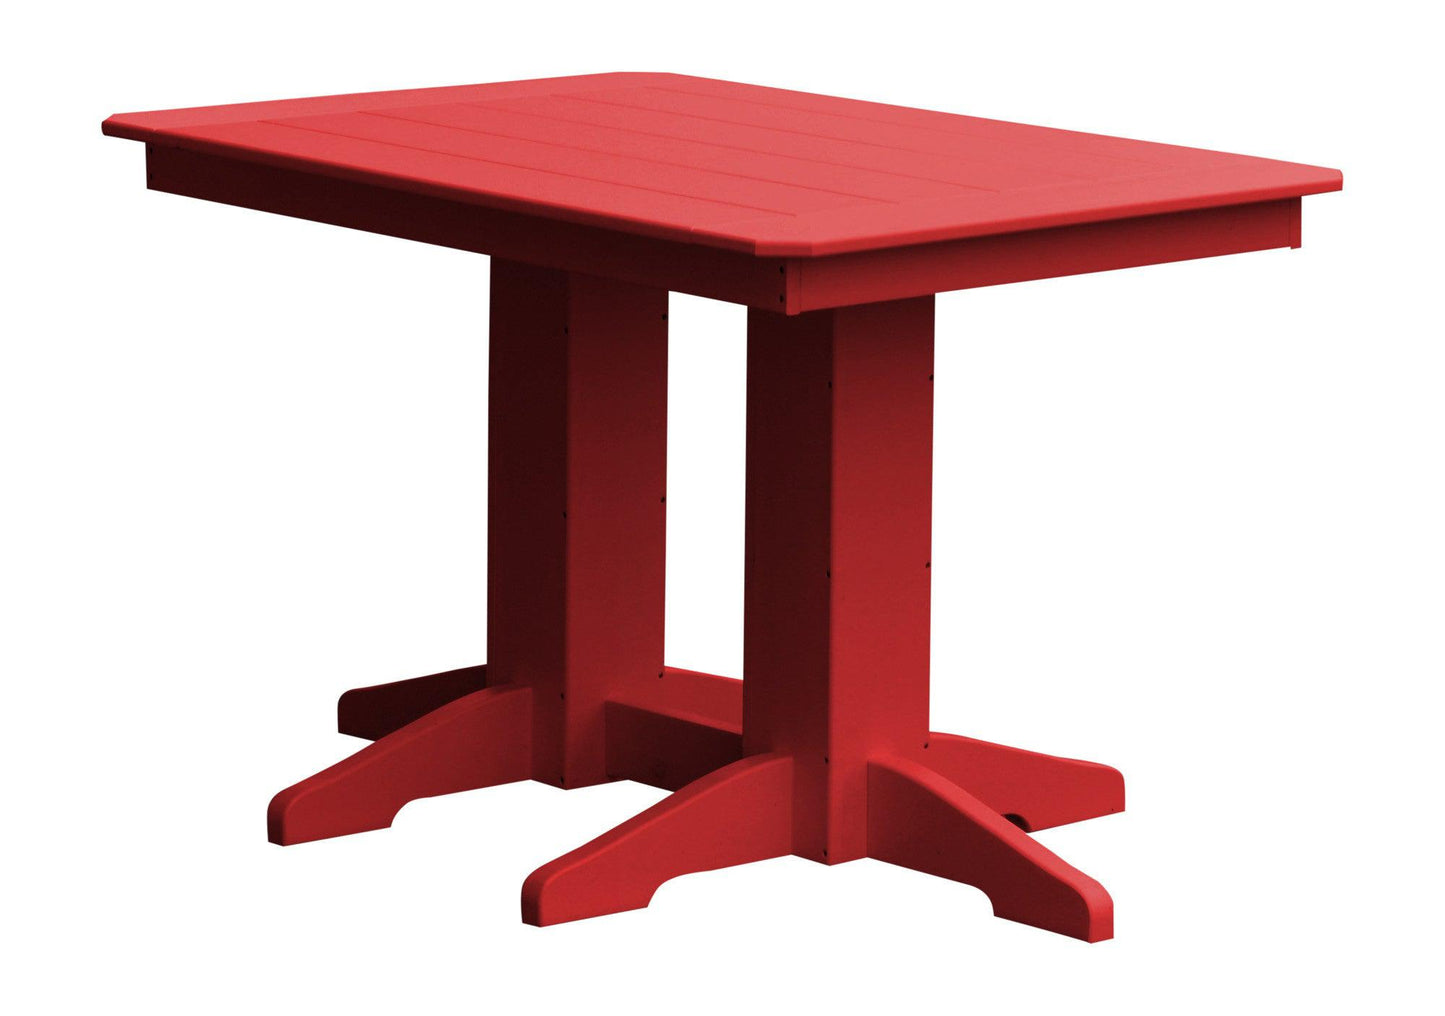 A&L Furniture Company Recycled Plastic 4' Dining Table - Bright Red